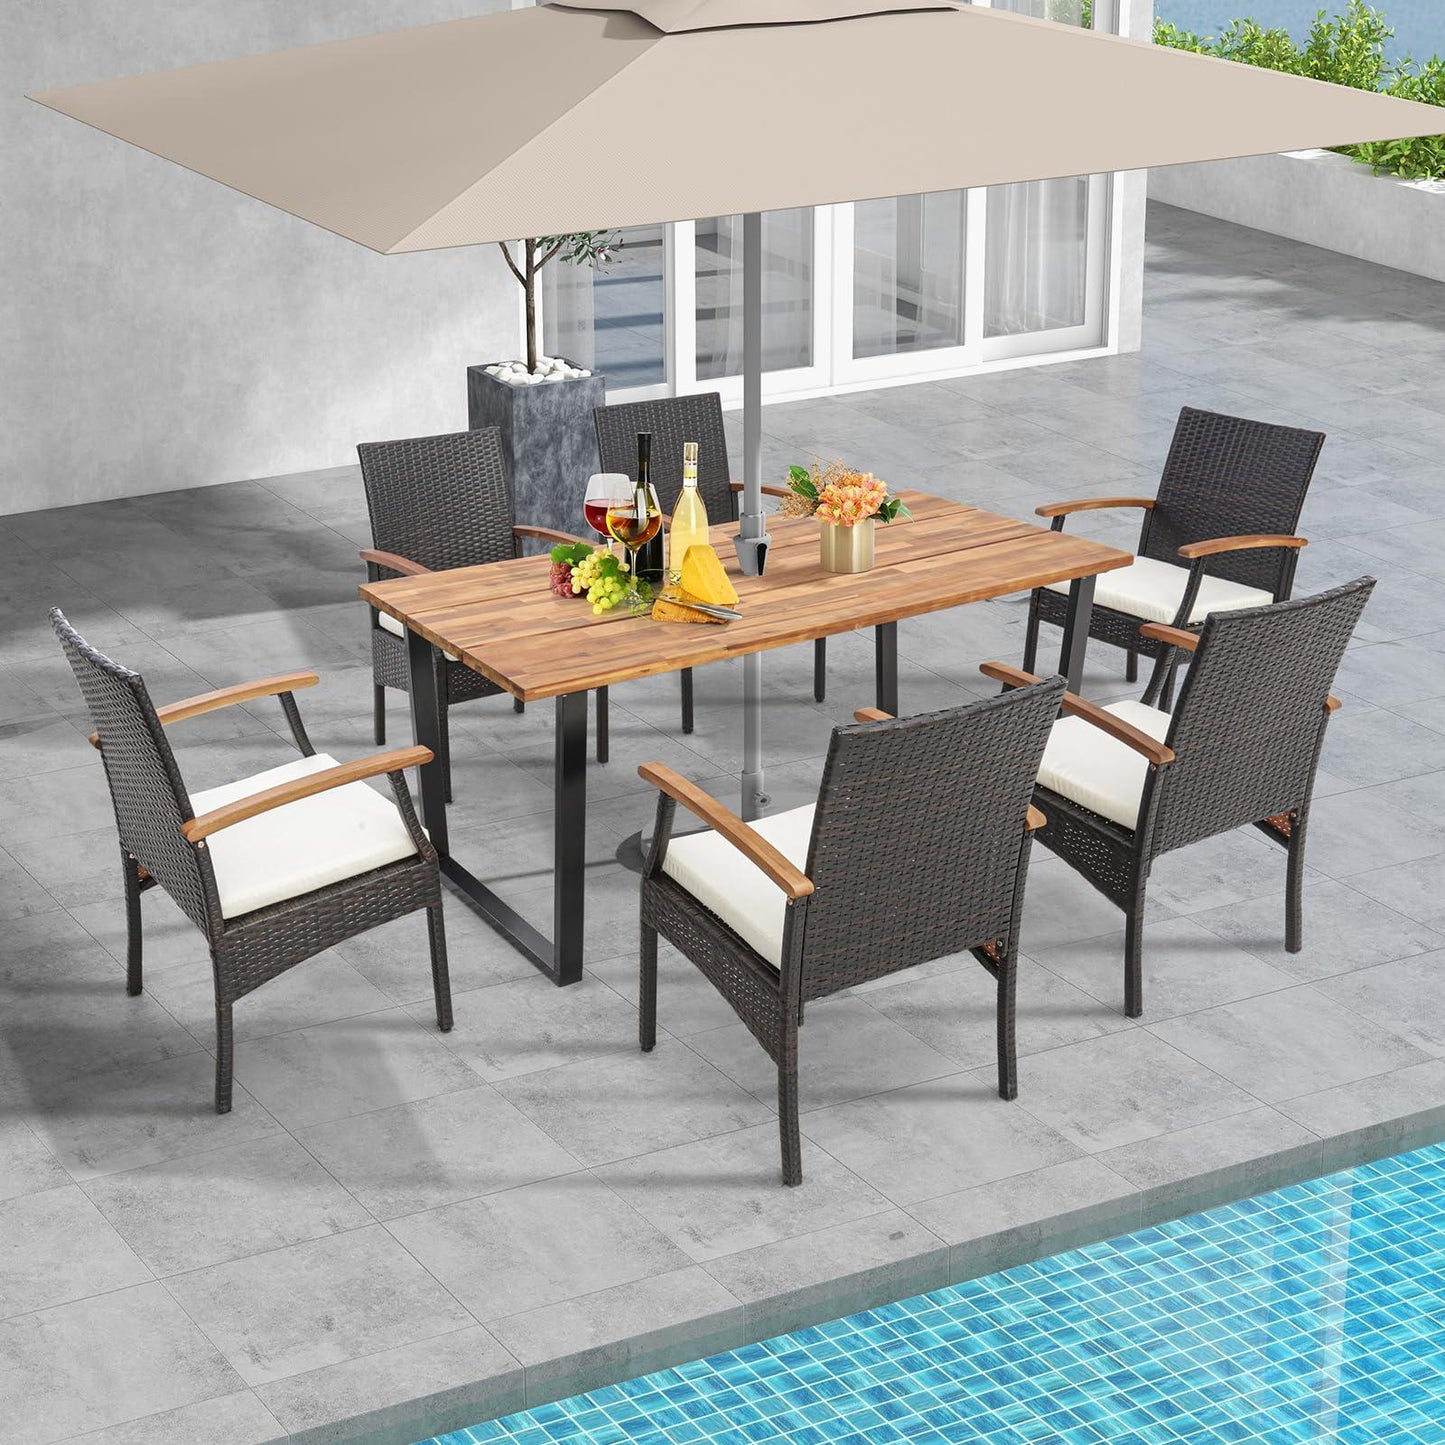 Tangkula Outdoor Dining Set for 6, Weather Resistant Heavy Duty 7 Pieces Patio Acacia Wood Table and Wicker Chairs with Umbrella Hole, Soft Padded Cushions, for Poolside, Backyard, Lawn (7 PCS) - CookCave